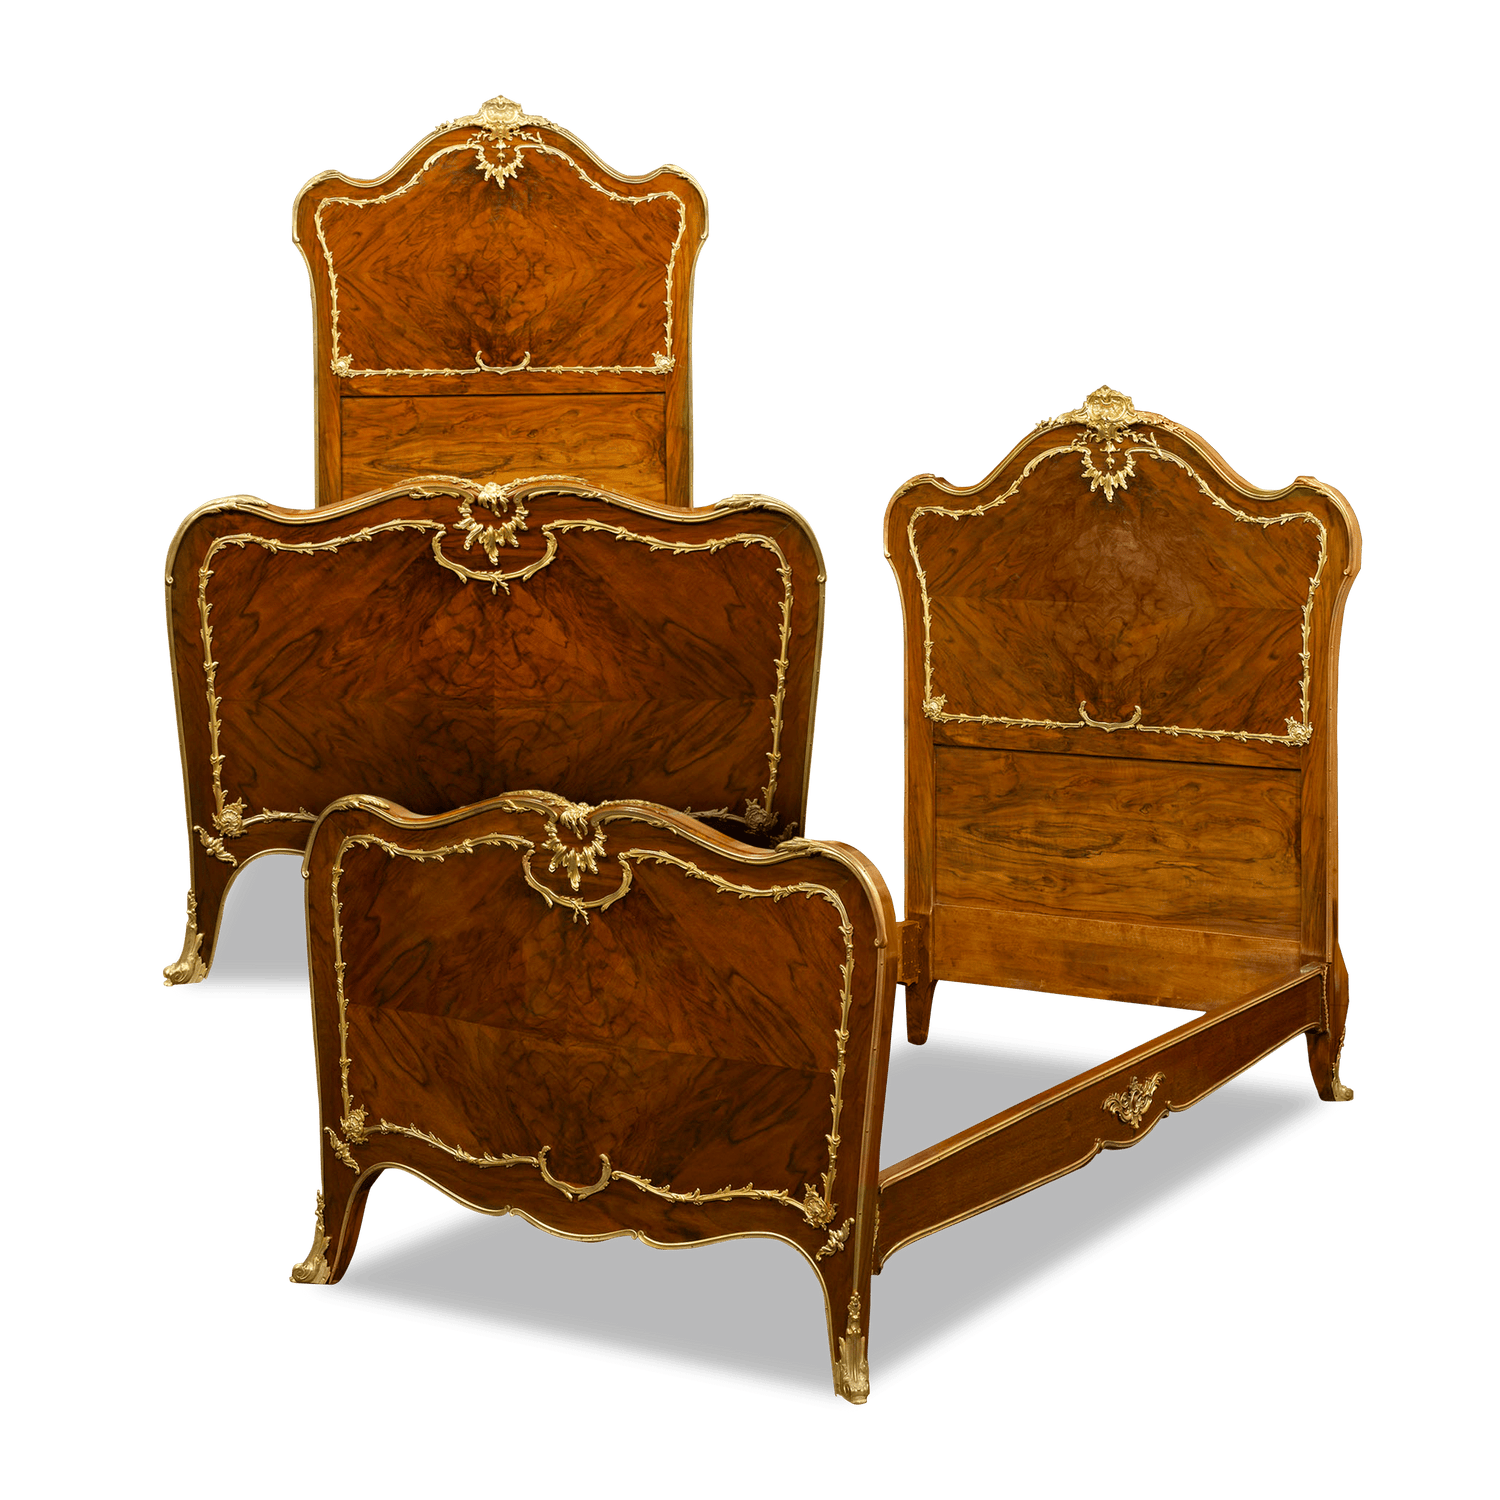 This rare pair of twin beds was created by François Linke